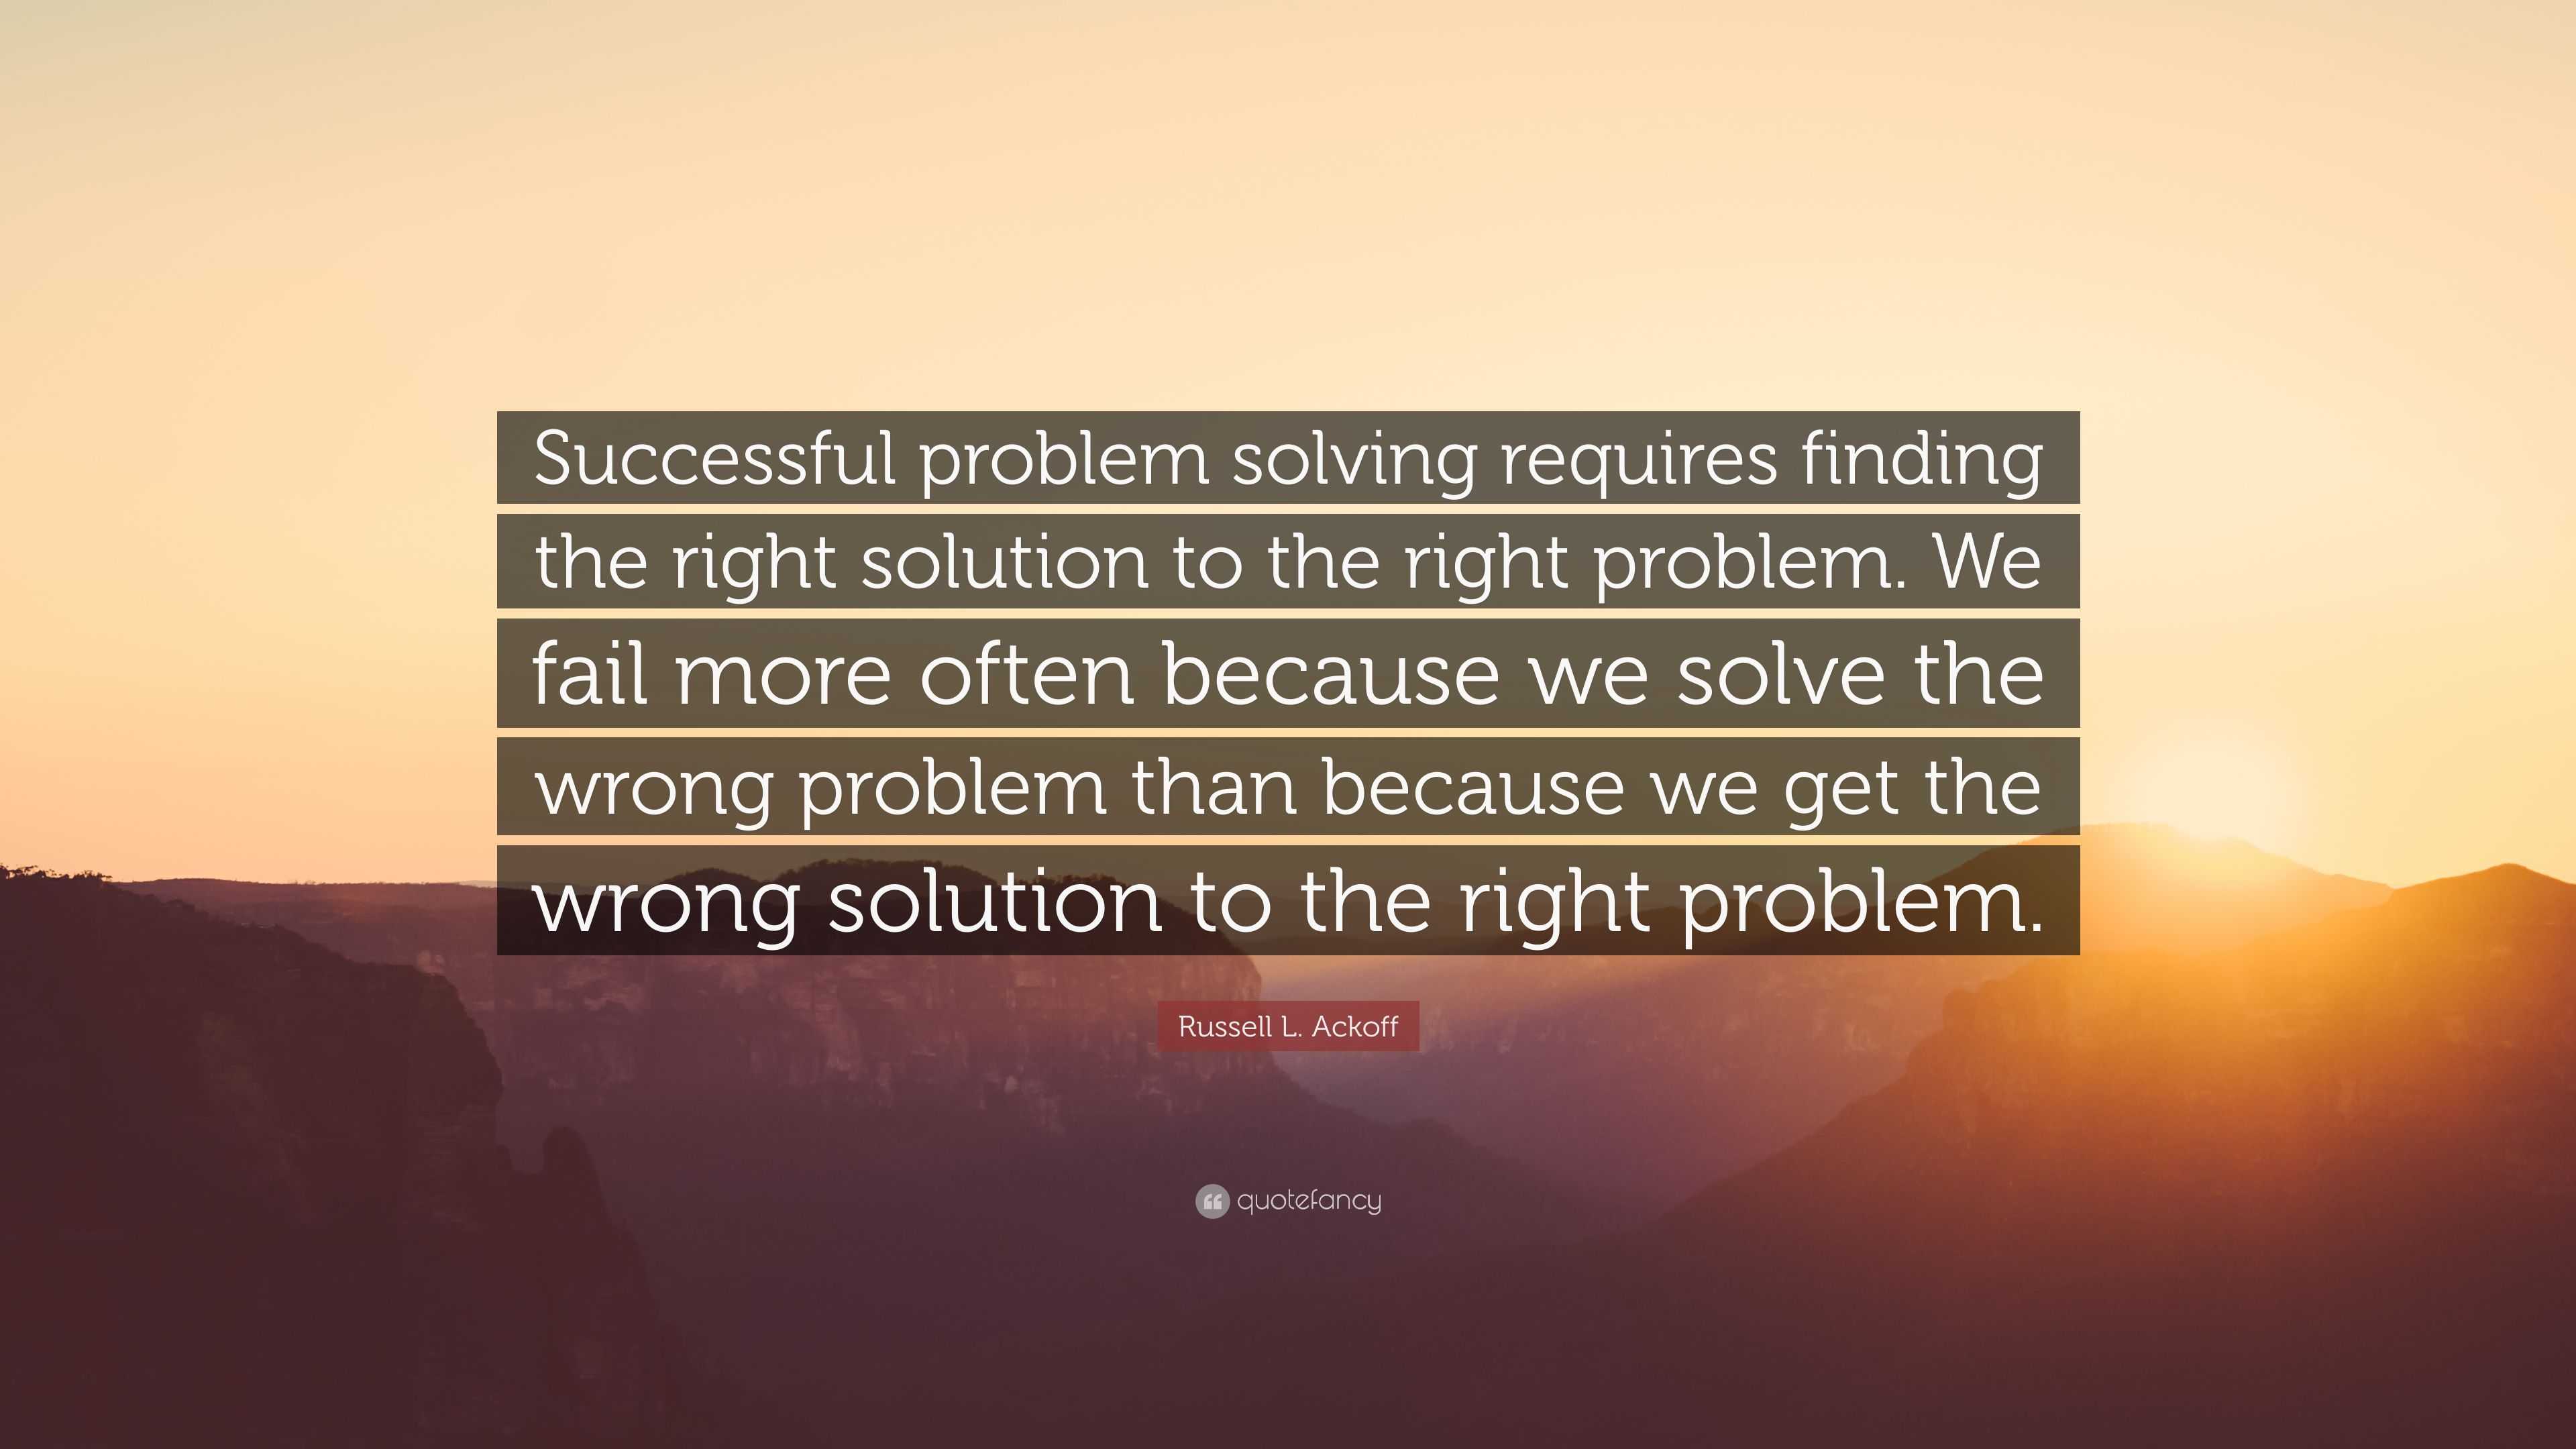 Russell L. Ackoff Quote: “Successful problem solving requires finding ...